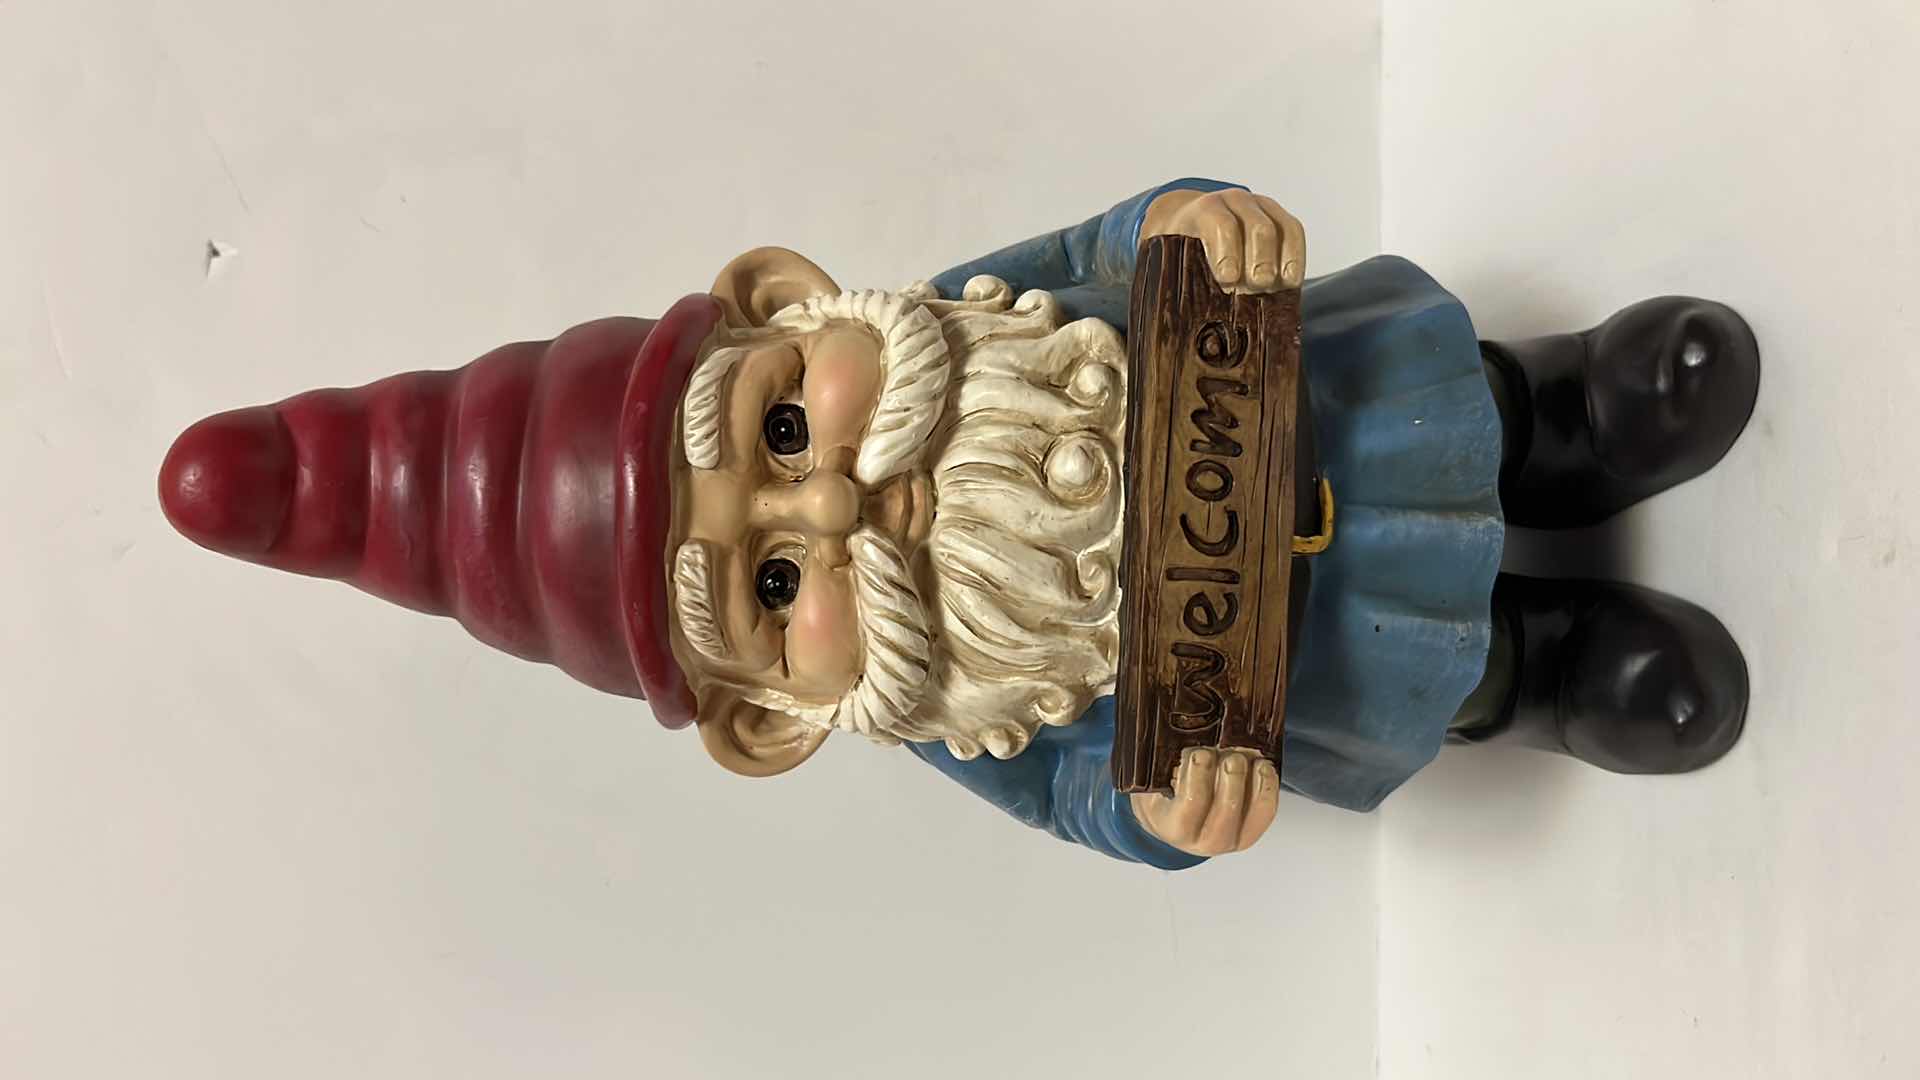 Photo 1 of WELCOME/SCRAM DOUBLE-SIDED RESIN GARDEN GNOME 13.5”